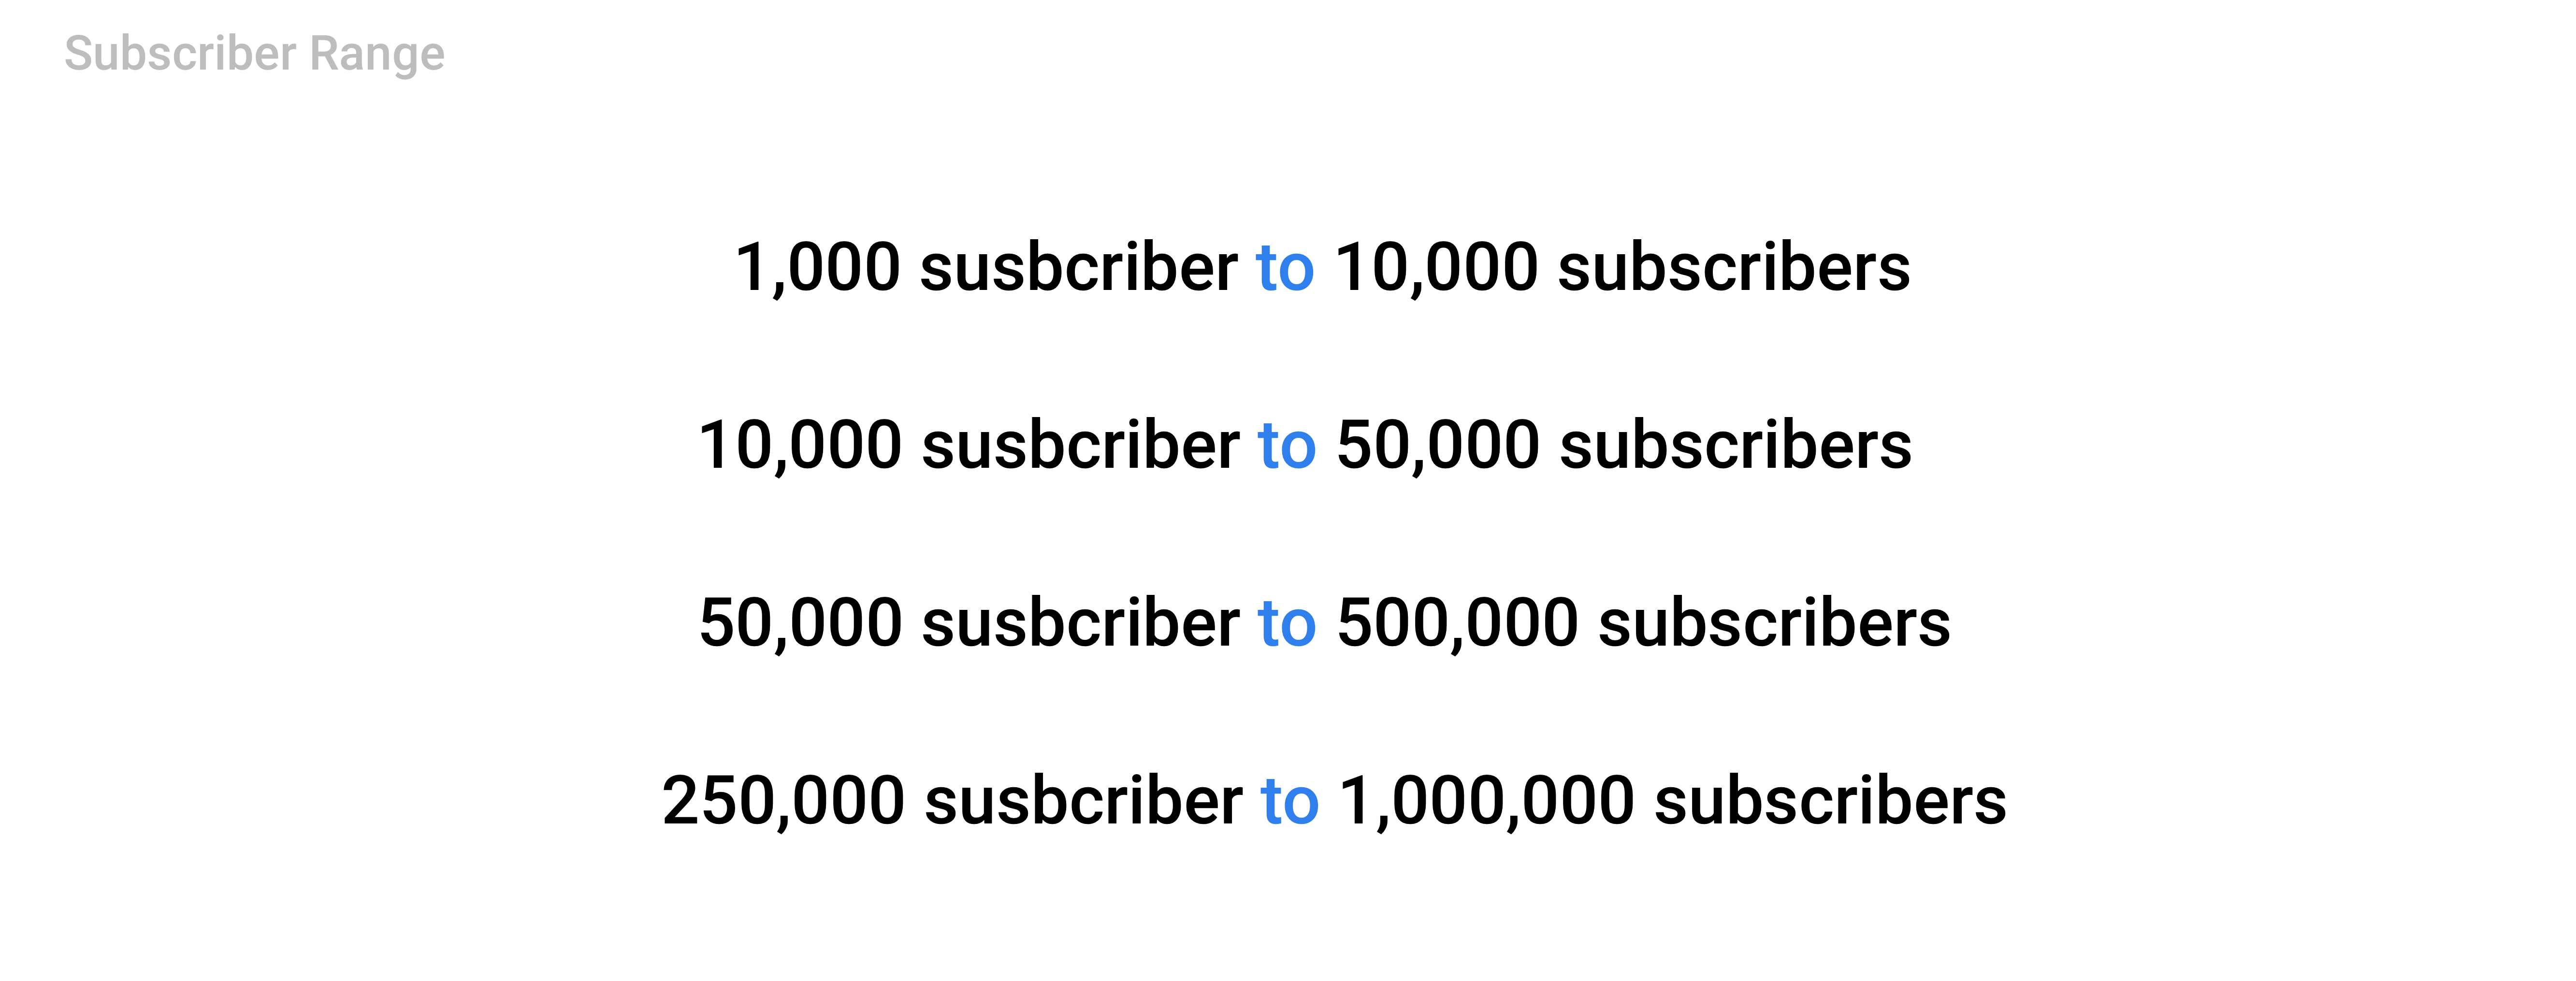 Subscriber Range for collaborations